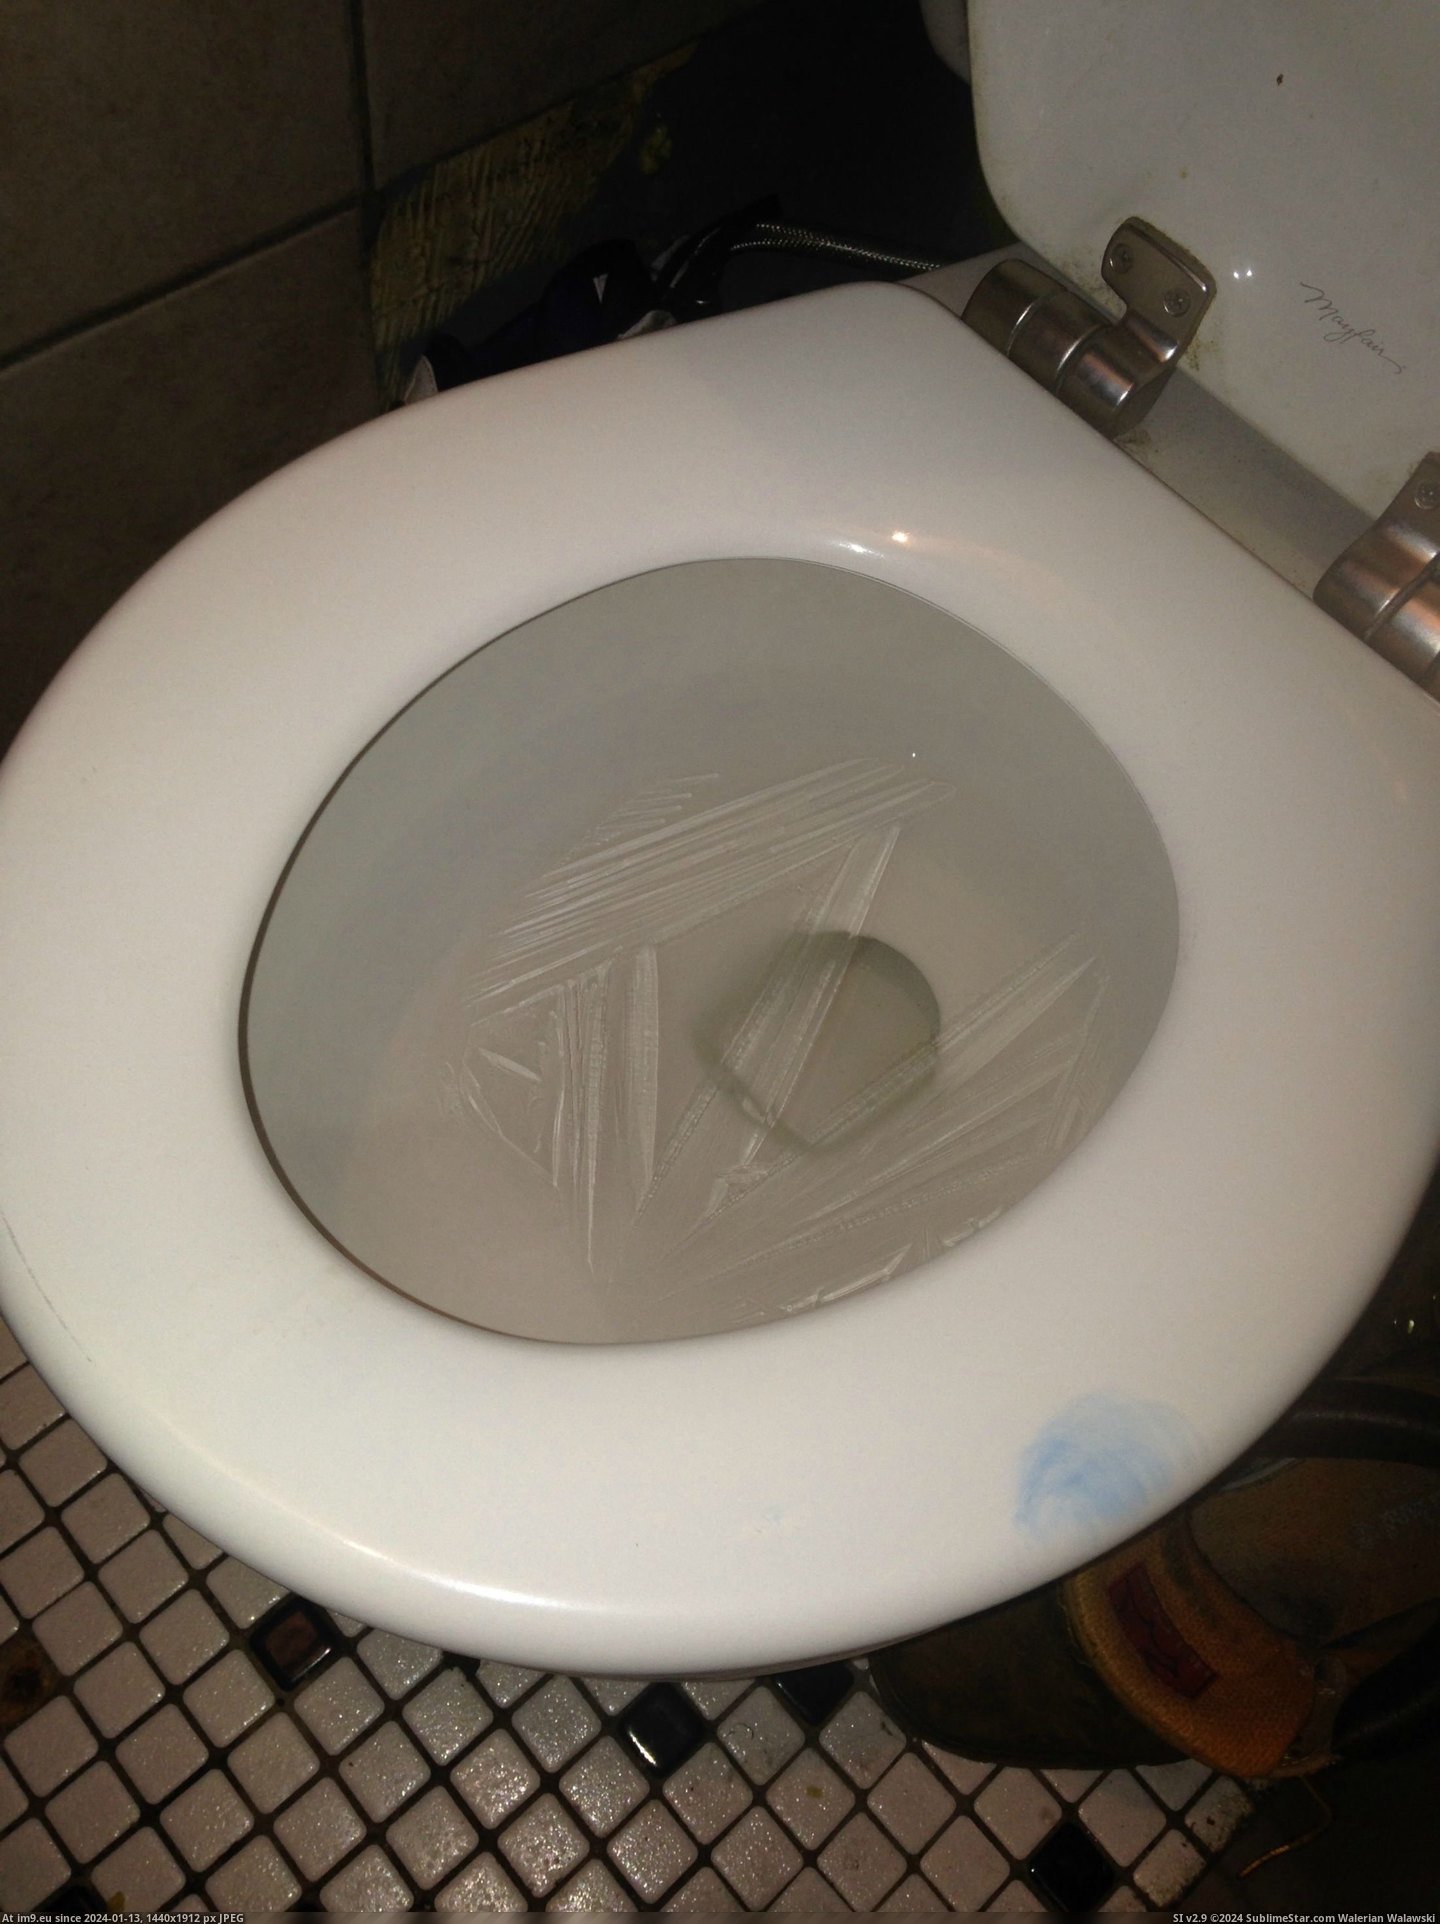 #Work #Water #Toilet #Froze #Bathroom #Cold [Mildlyinteresting] It's so cold in the bathroom at work that the toilet water froze today. Pic. (Image of album My r/MILDLYINTERESTING favs))